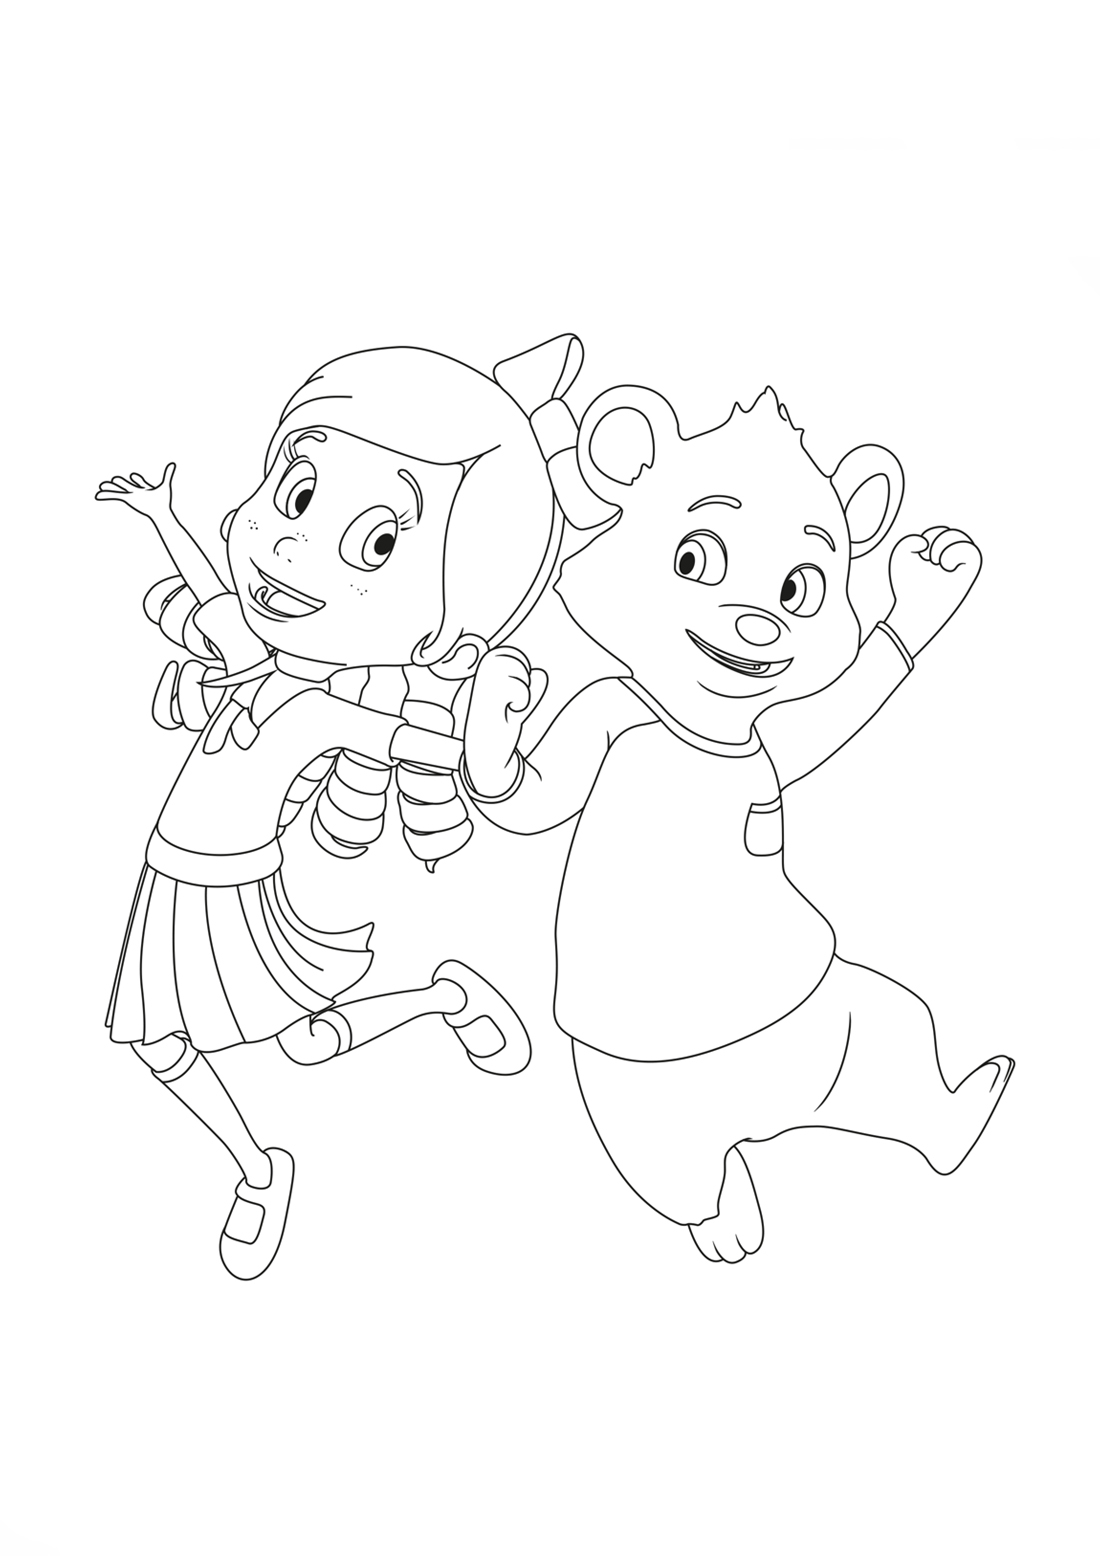 Goldie and Bear coloring pages to download and print for free